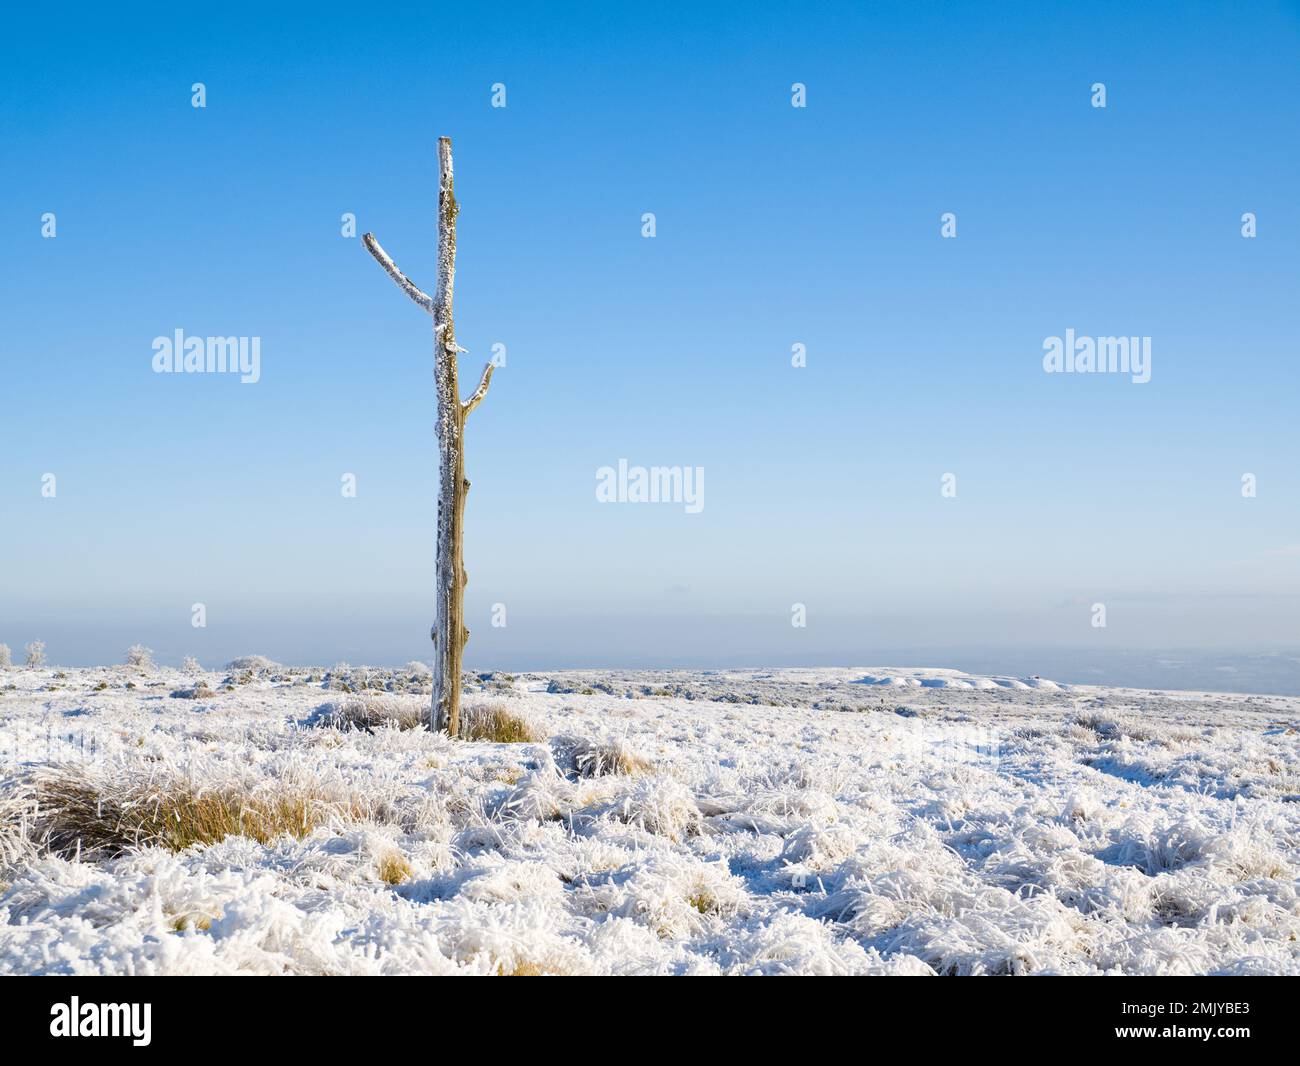 Hoar frost at the Three-forked Pole, Hoar Edge, Clee Hill Common, Shropshire. A historic waymark & meeting point of three local parishes. Stock Photo